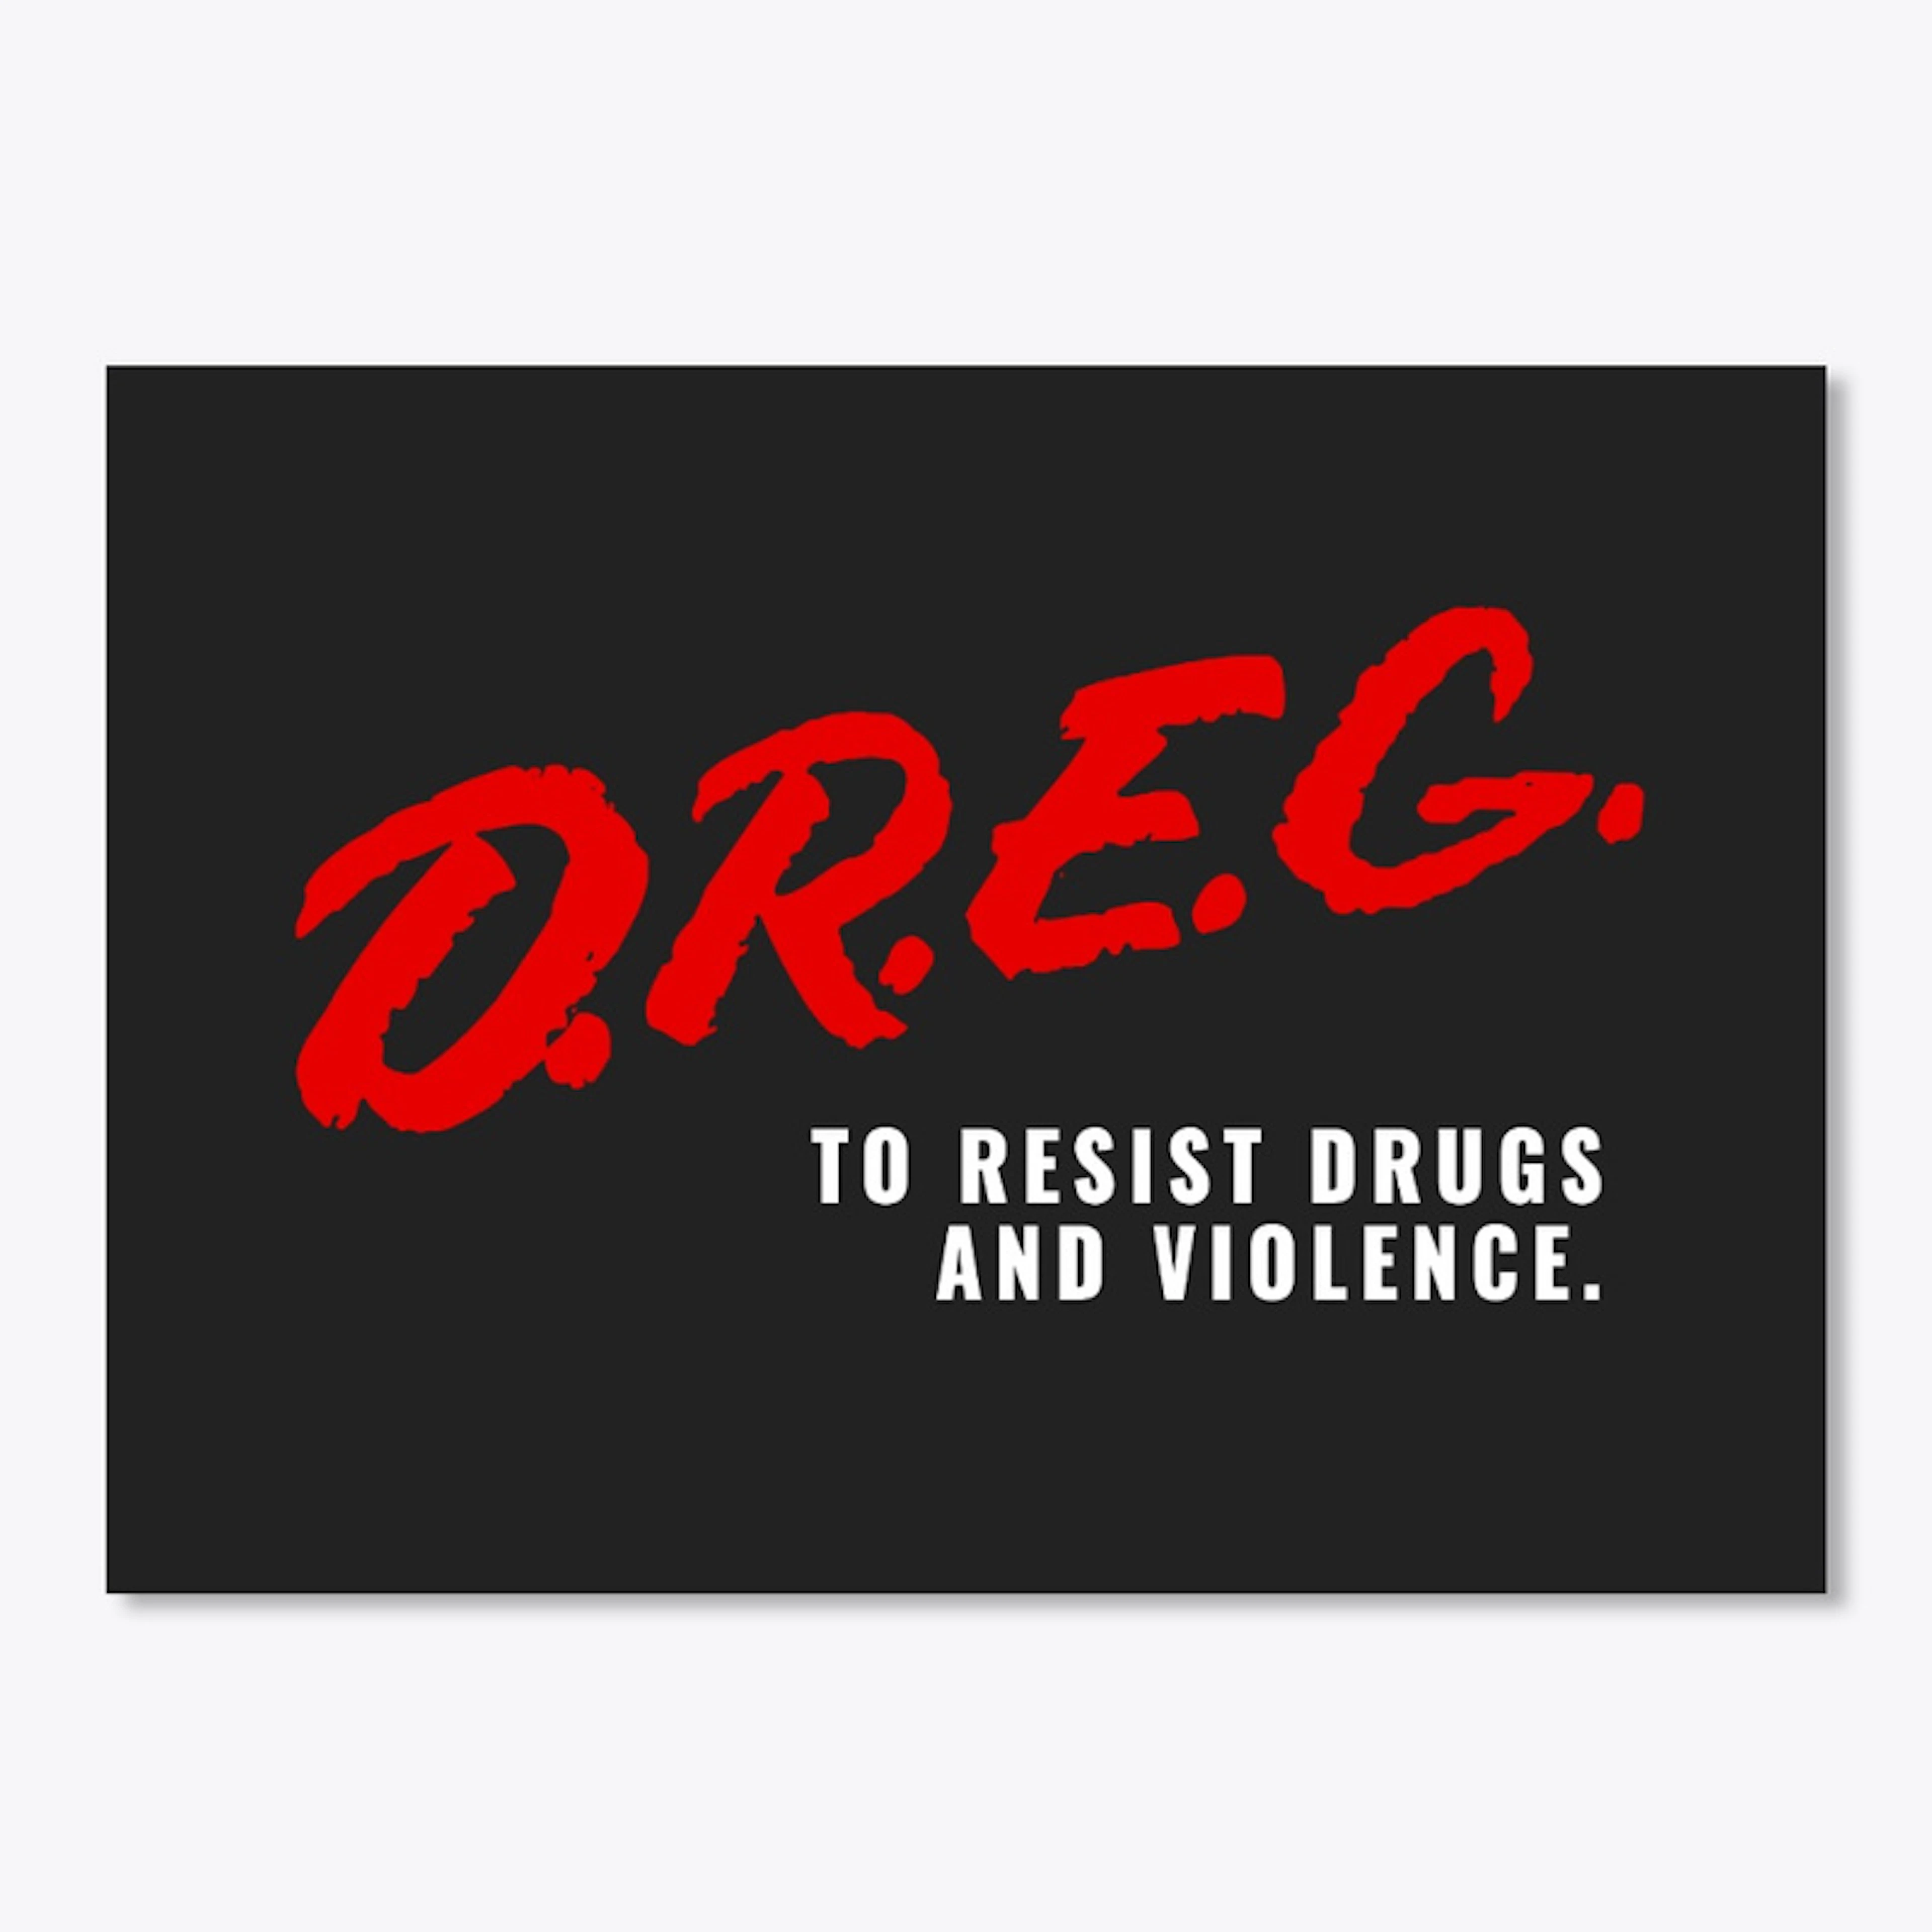 D.R.E.G. TO RESIST DRUGS AND VIOLENCE